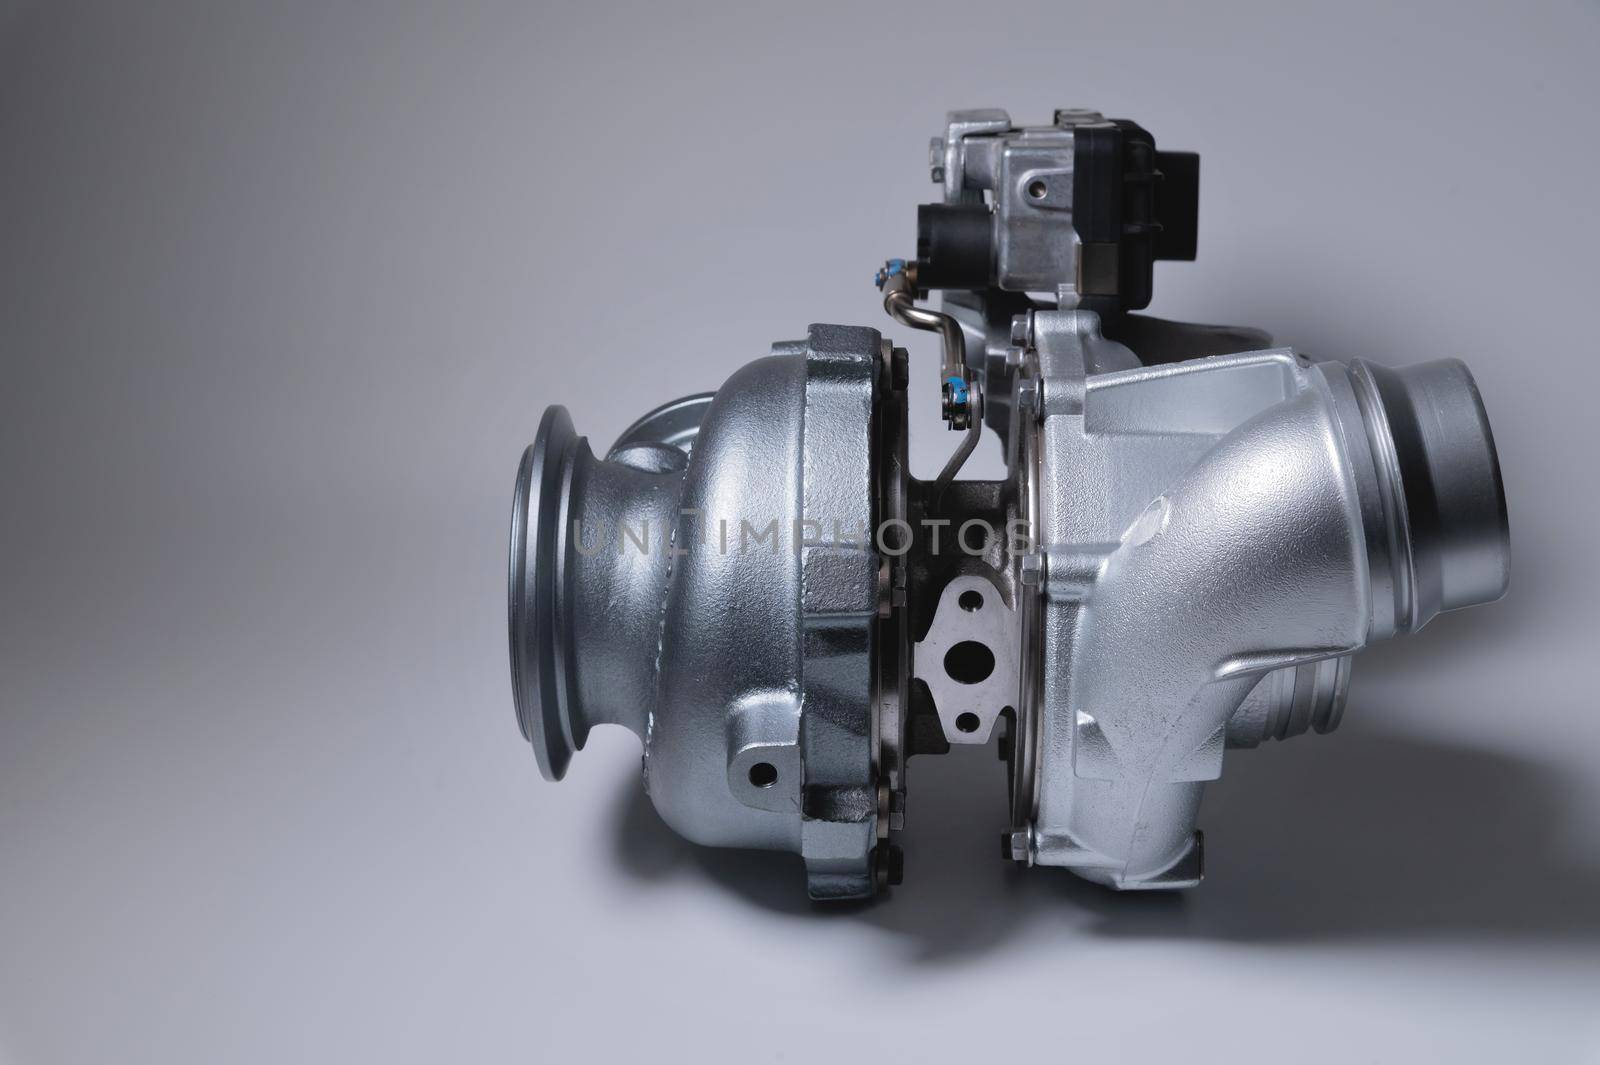 New metal turbocharger. Exhaust gas blower. Parts background by yanik88